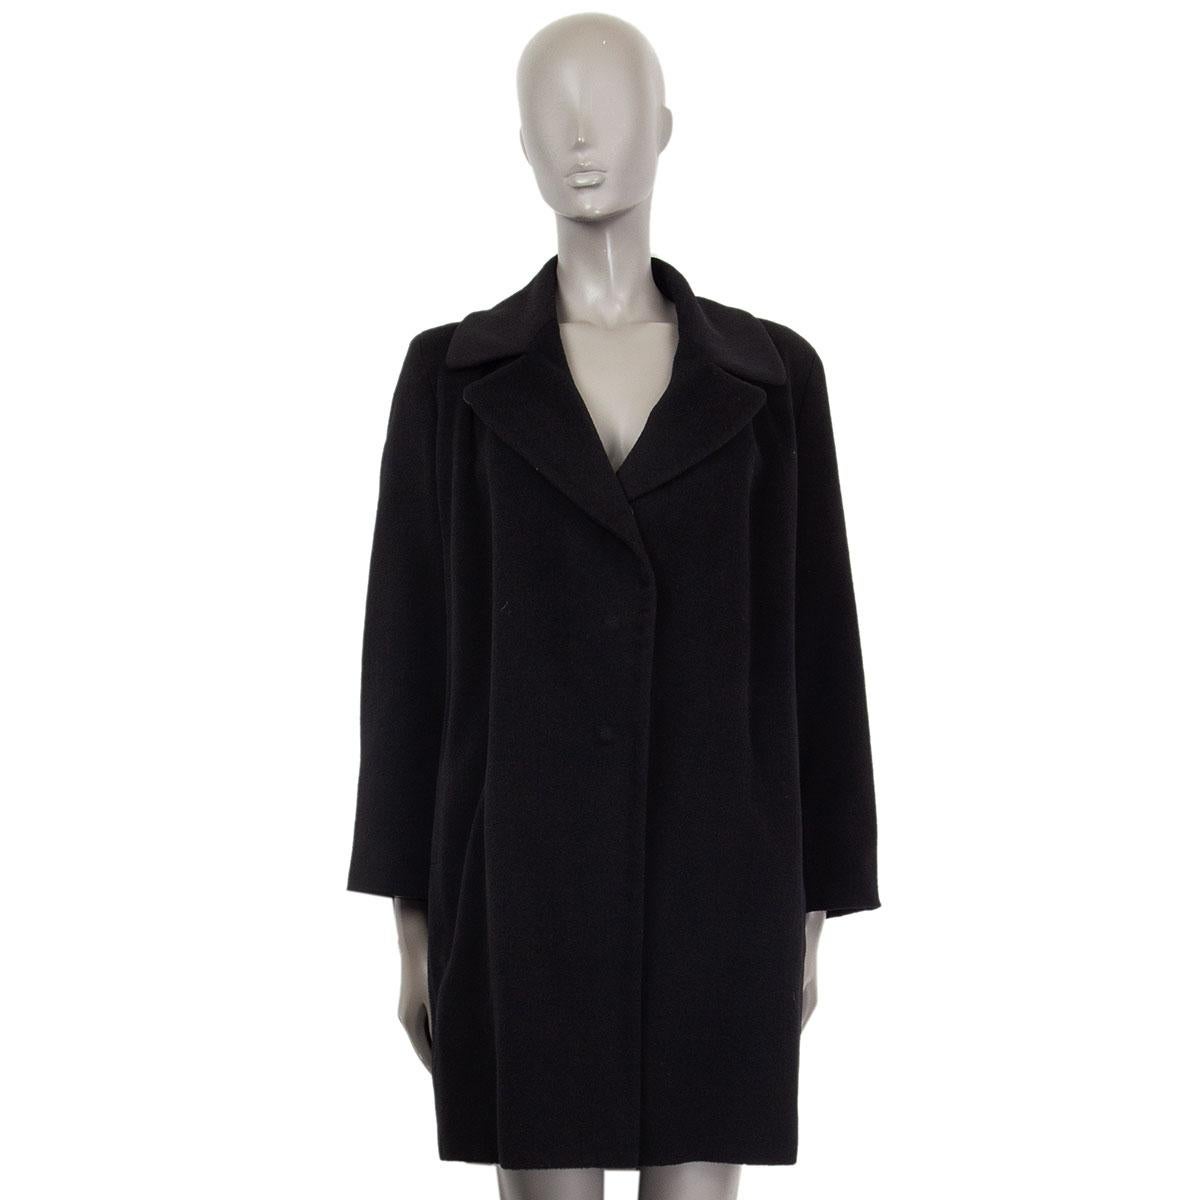 authentic Loro Piana notch-collar coat in black cashmere (100%). Opens with three push buttons and is lined black viscose (100%). Has two slit pockets on the side. Has been worn and is in excellent condition. 

Tag Size 44
Size L
Shoulder Width41cm